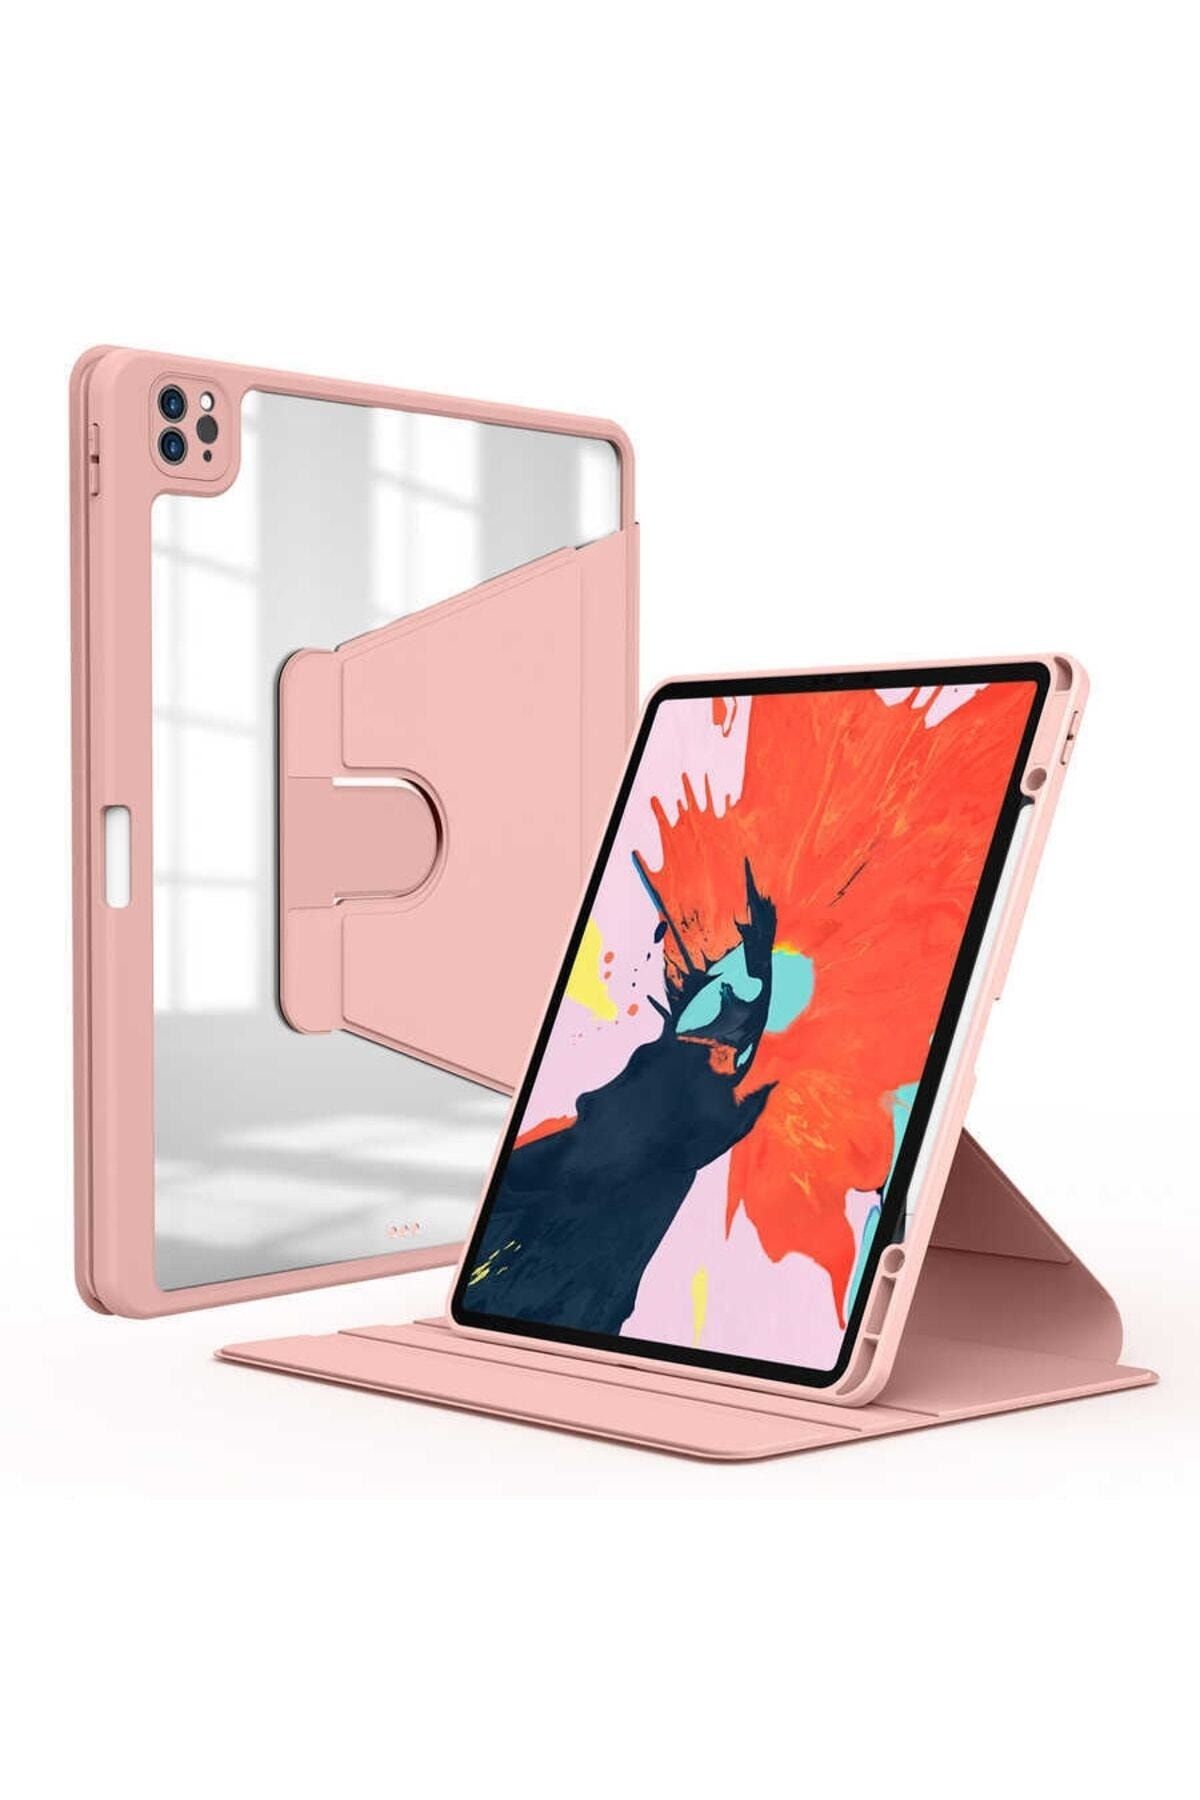  Apple iPad Pro 11-inch (4th Generation): with M2 chip